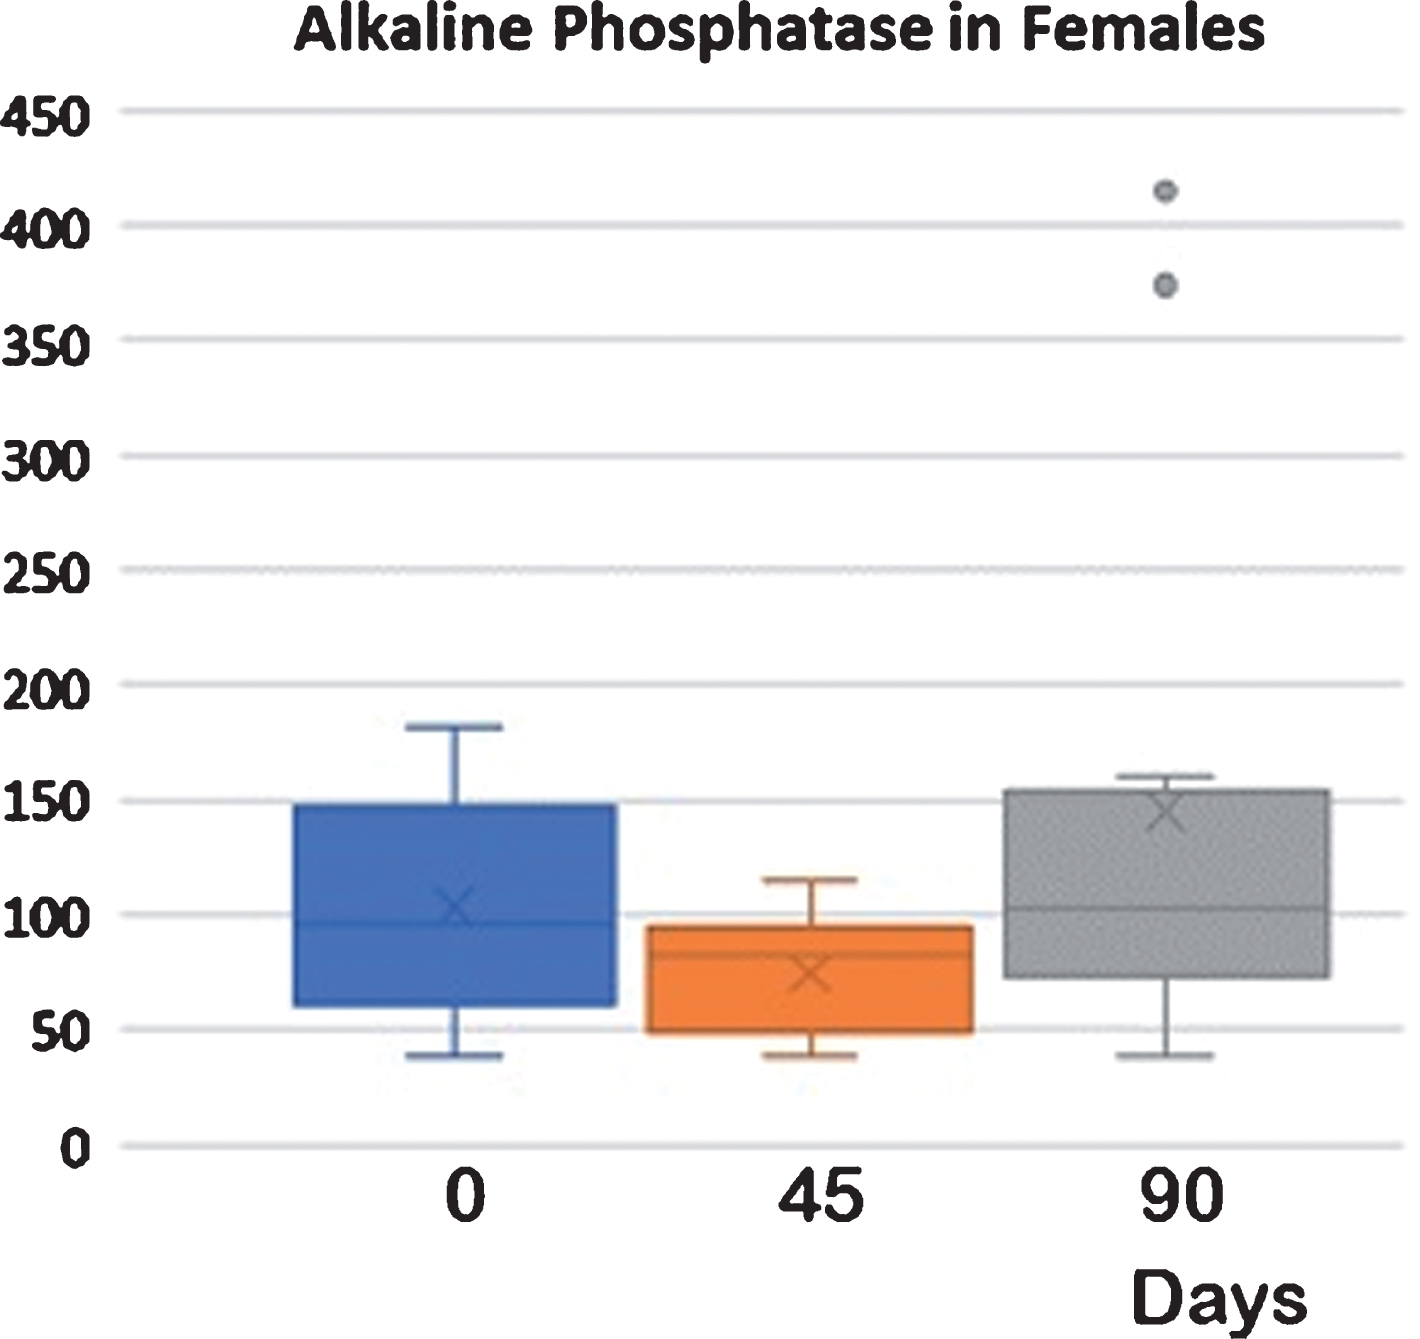 Alkaline Phosphatase in females at different times and treatments. D0 vs D45 < 0,05: D45 vs D90 < 0,05: D0 vs D90 NS Serum alkaline phosphatase in females. After 45 days of supplementation, there was a statistically significant reduction of serum concentrations of alkaline phosphatase These values returned to baseline after a further 45 days of basal diet without supplementation (control). Also, in this case the increase was statistically significant, while no difference was observed between baseline and data at day 90, (see Table 2).